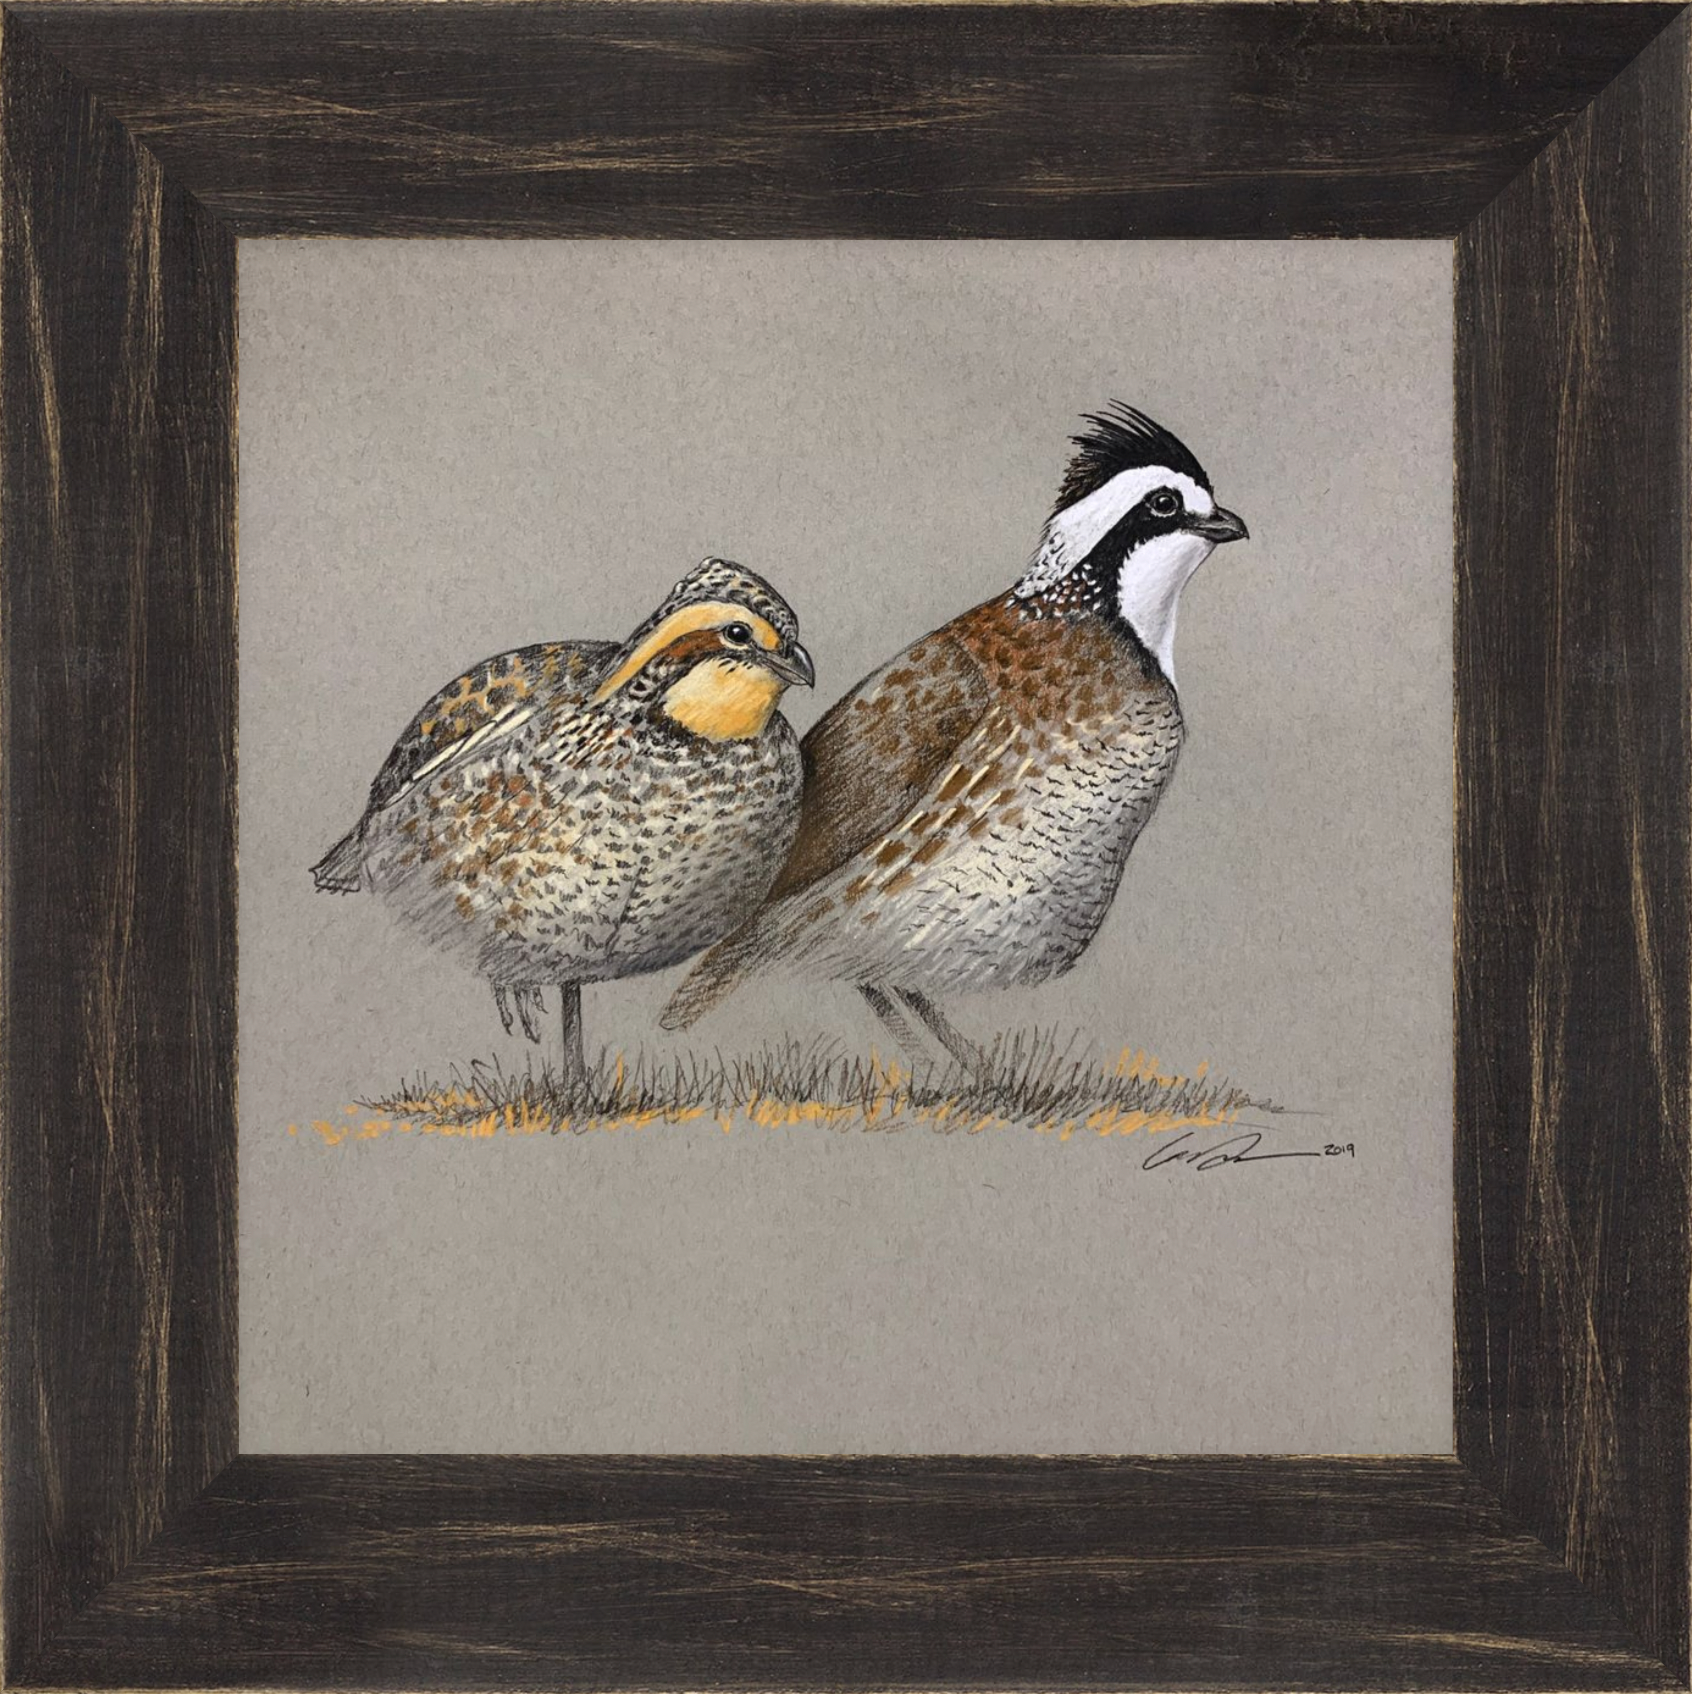 A pastel full color drawing of a male and female bobwhite quail, framed in black rustic frame